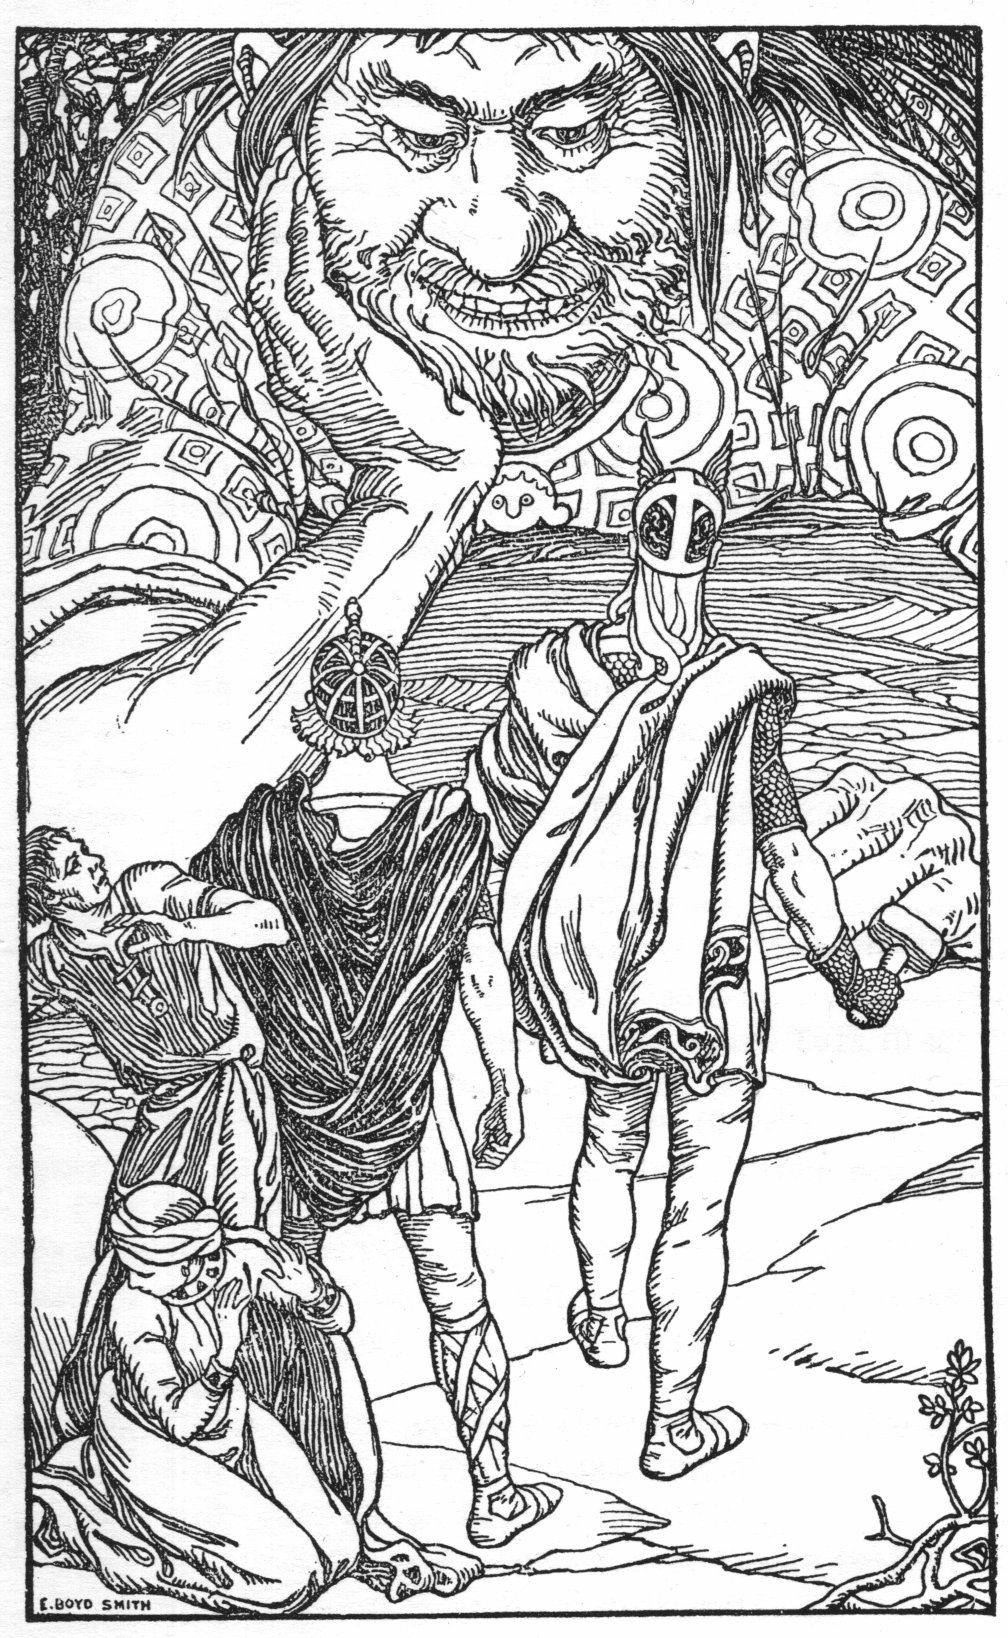 Frontispiece of Brown, Abbie Farwell (1902). "In the Days of Giants: A Book of Norse Tales" Illustrations by E. Boyd Smith. Houghton, Mifflin & Co. Image is in the public domain.